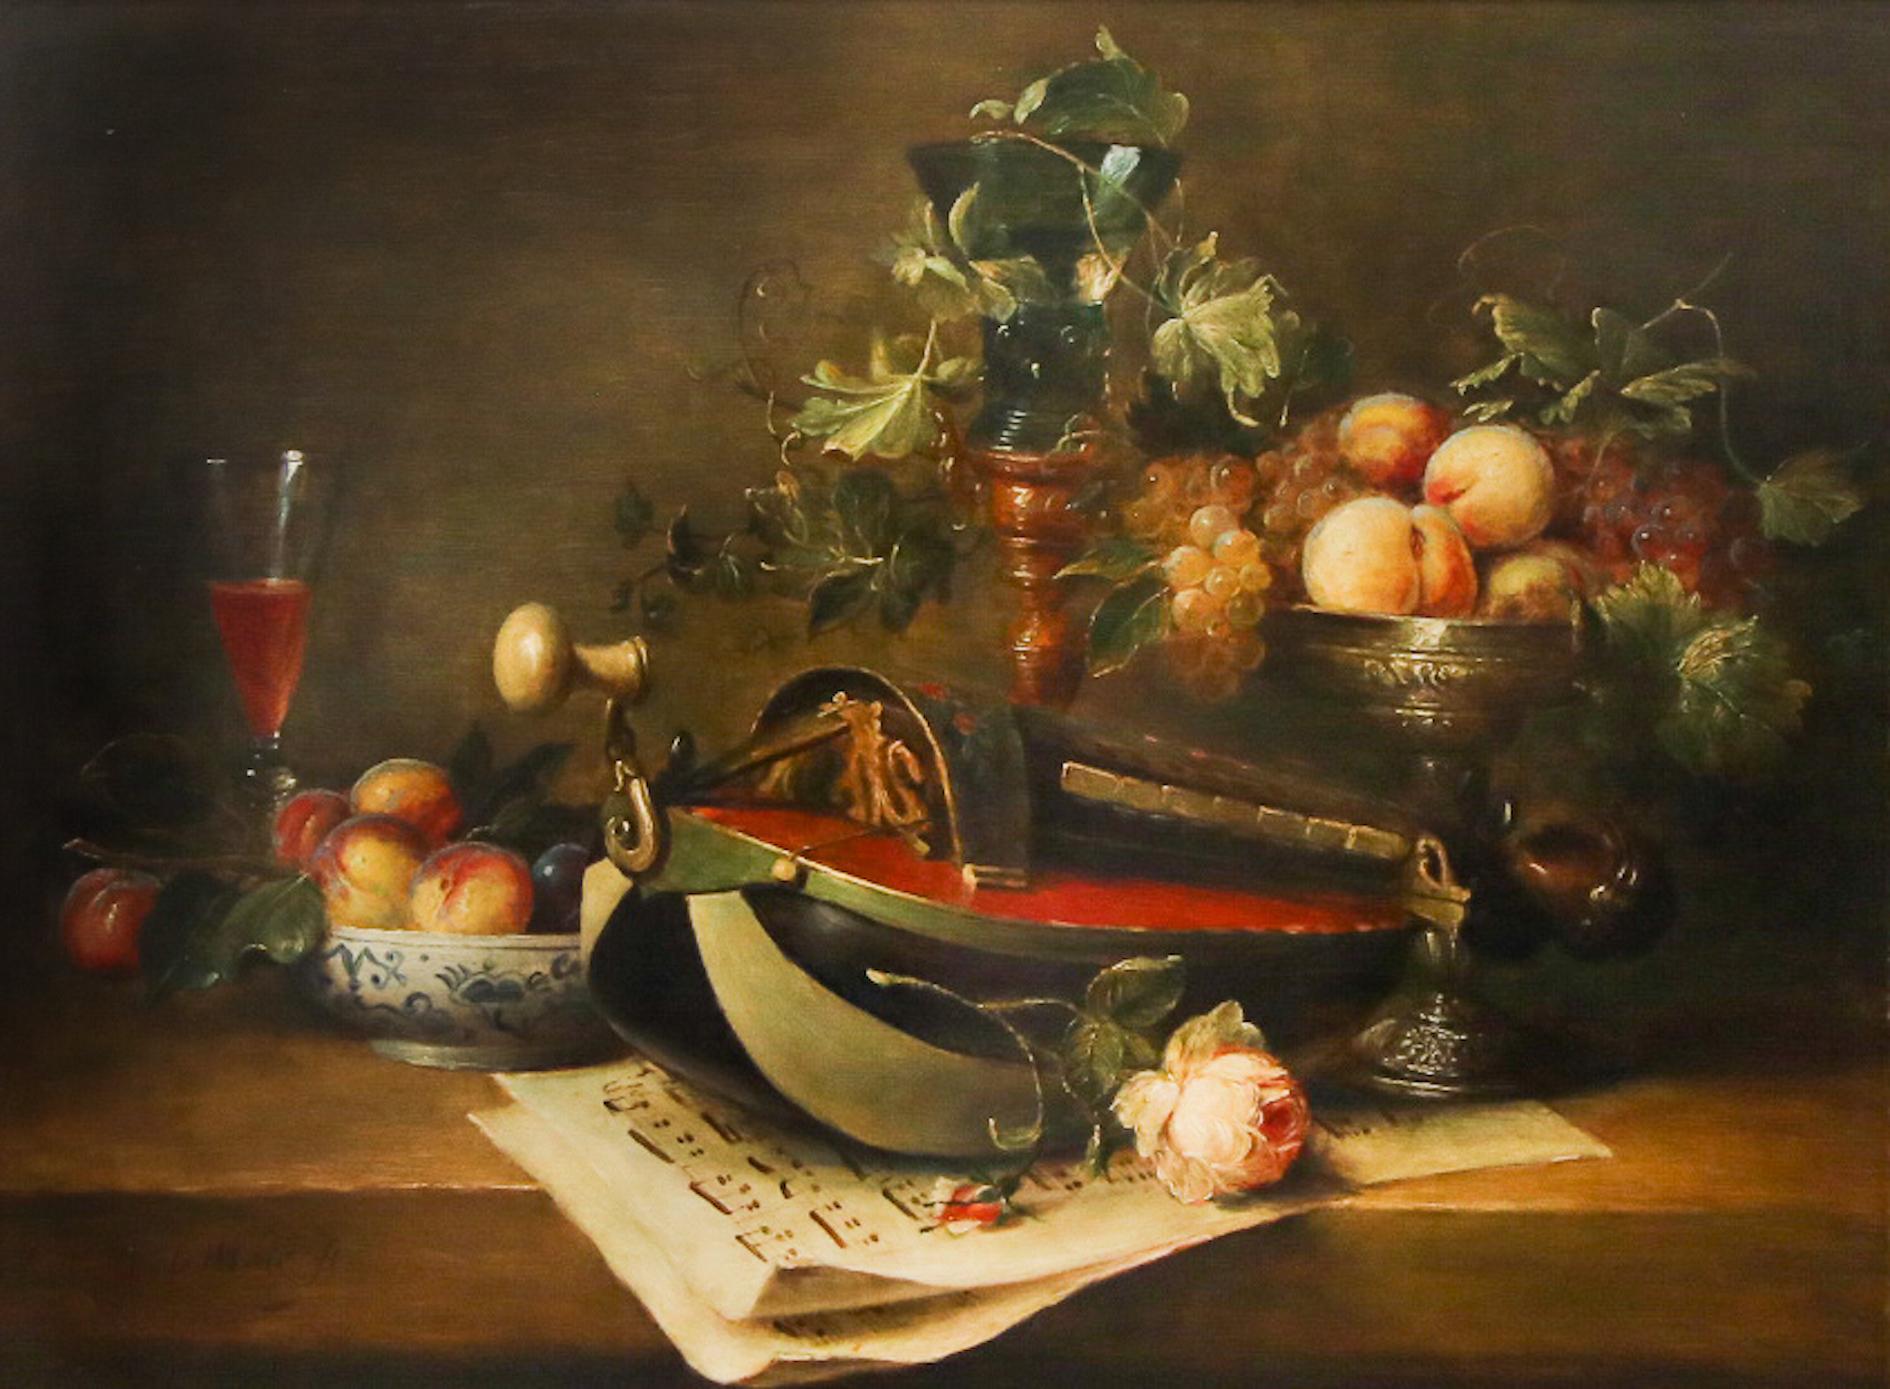 Hurdy-gurdy with Peony and Fruit - 21st Century Classic Style Dutch Still-Life